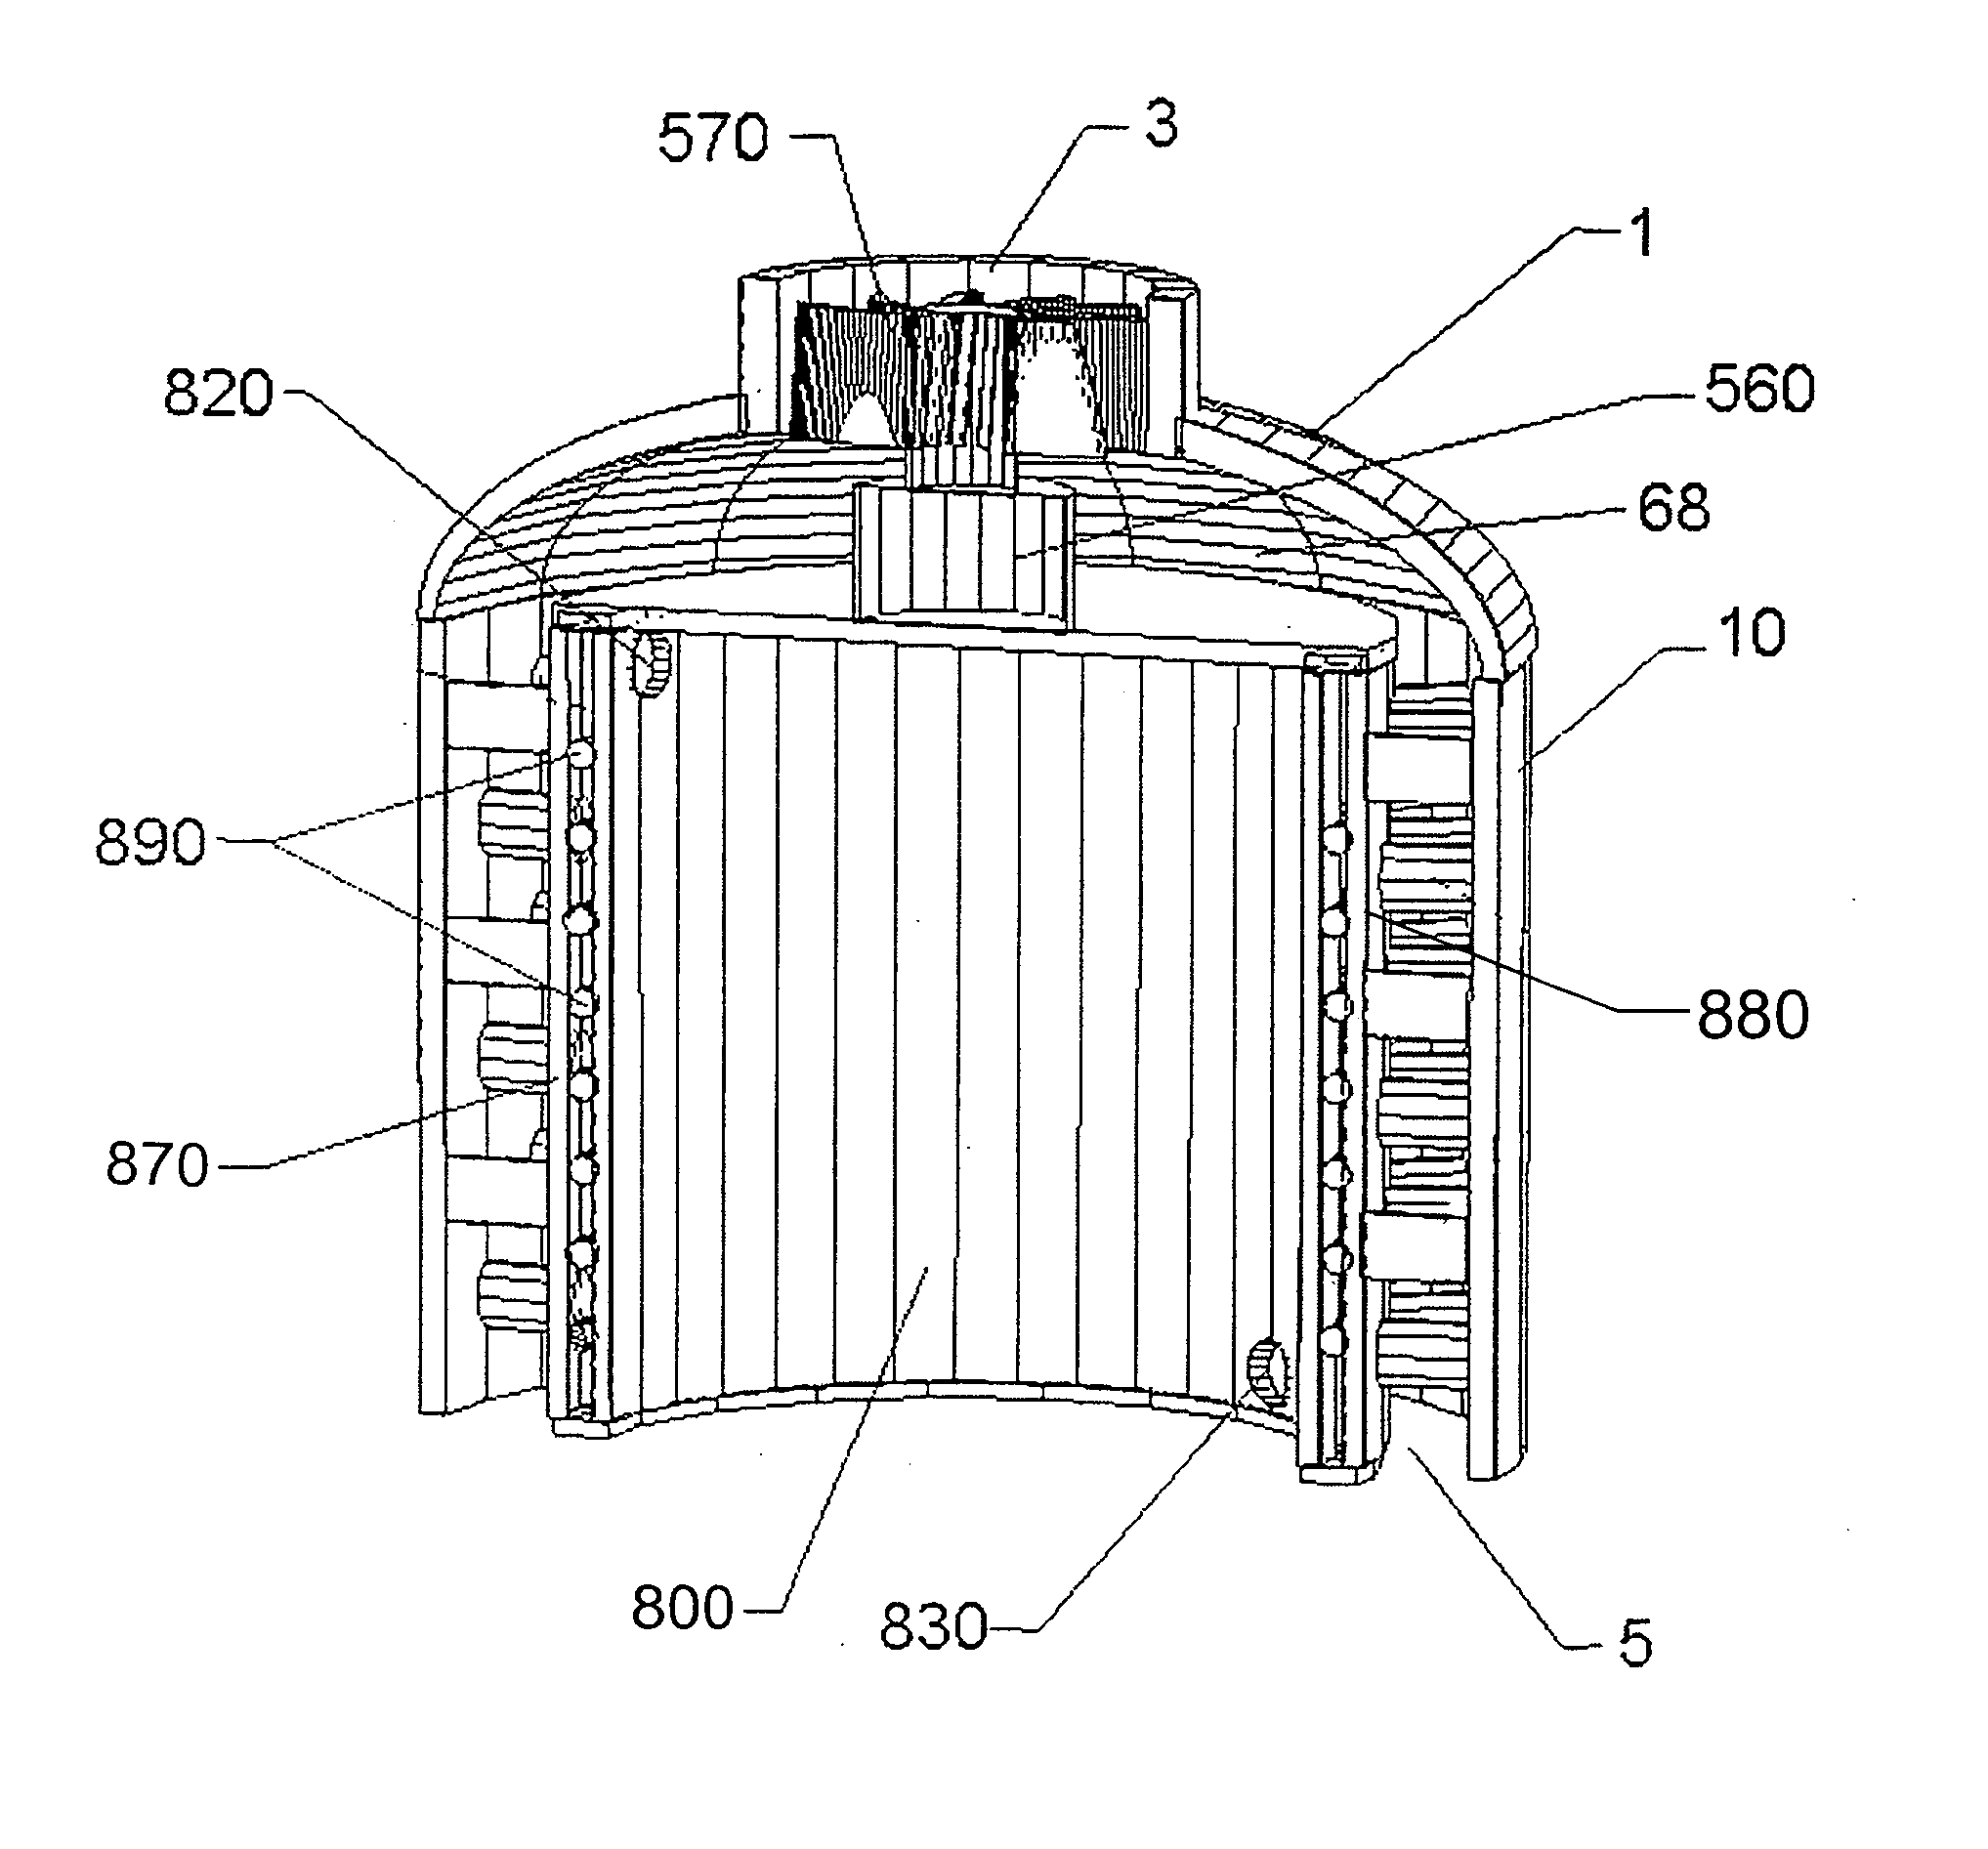 Method and apparatus for highly efficient compact vapor compression cooling